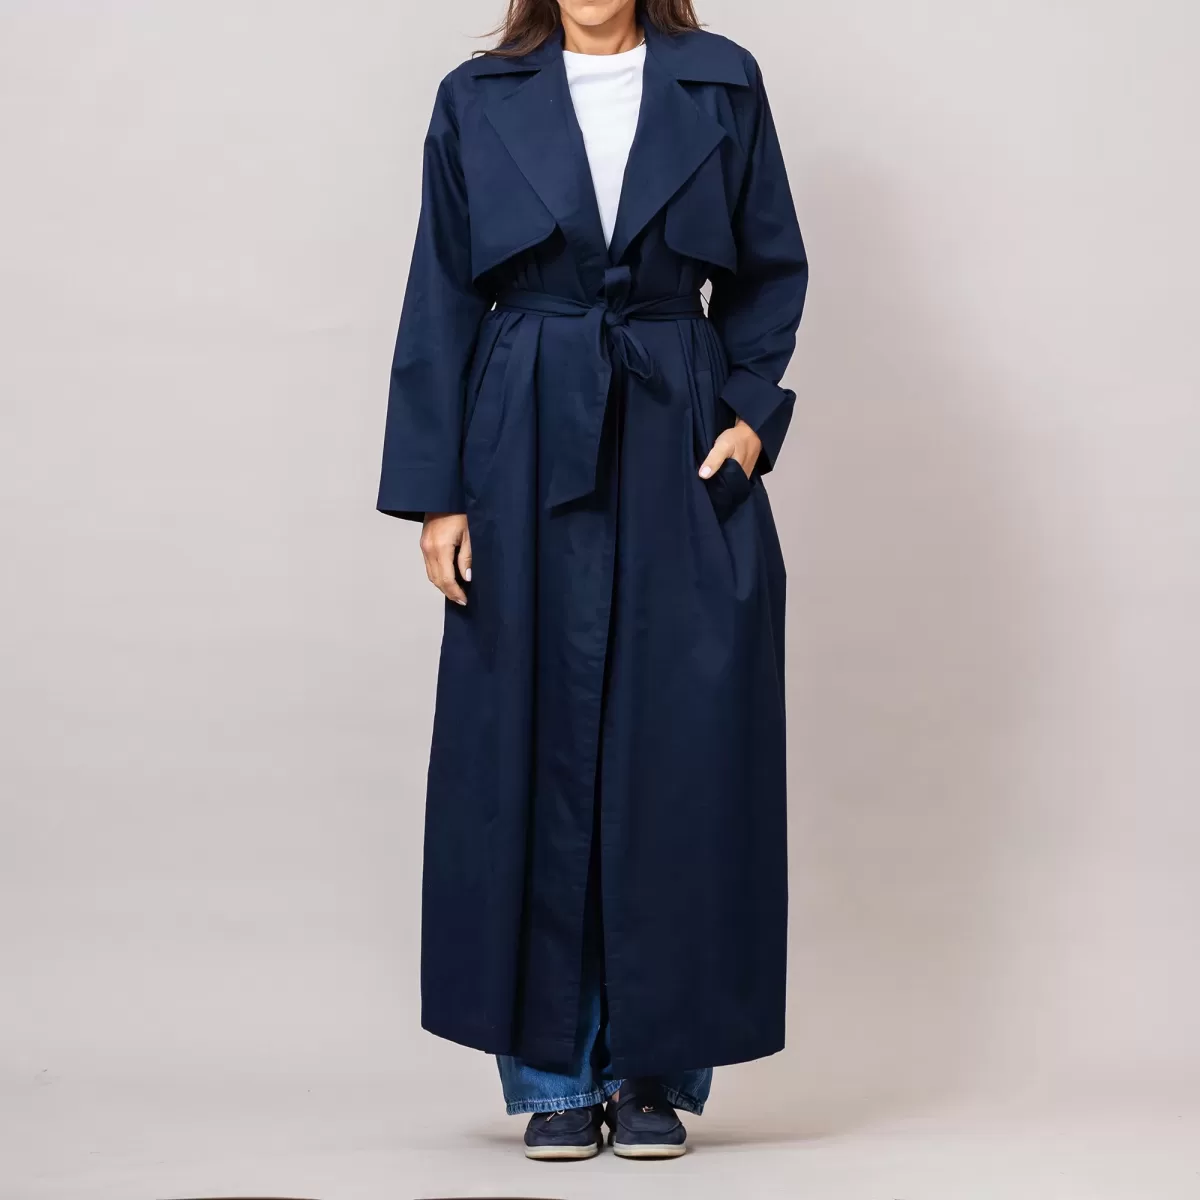 Duster Textured Cotton Navy Blue Coat with Gilet